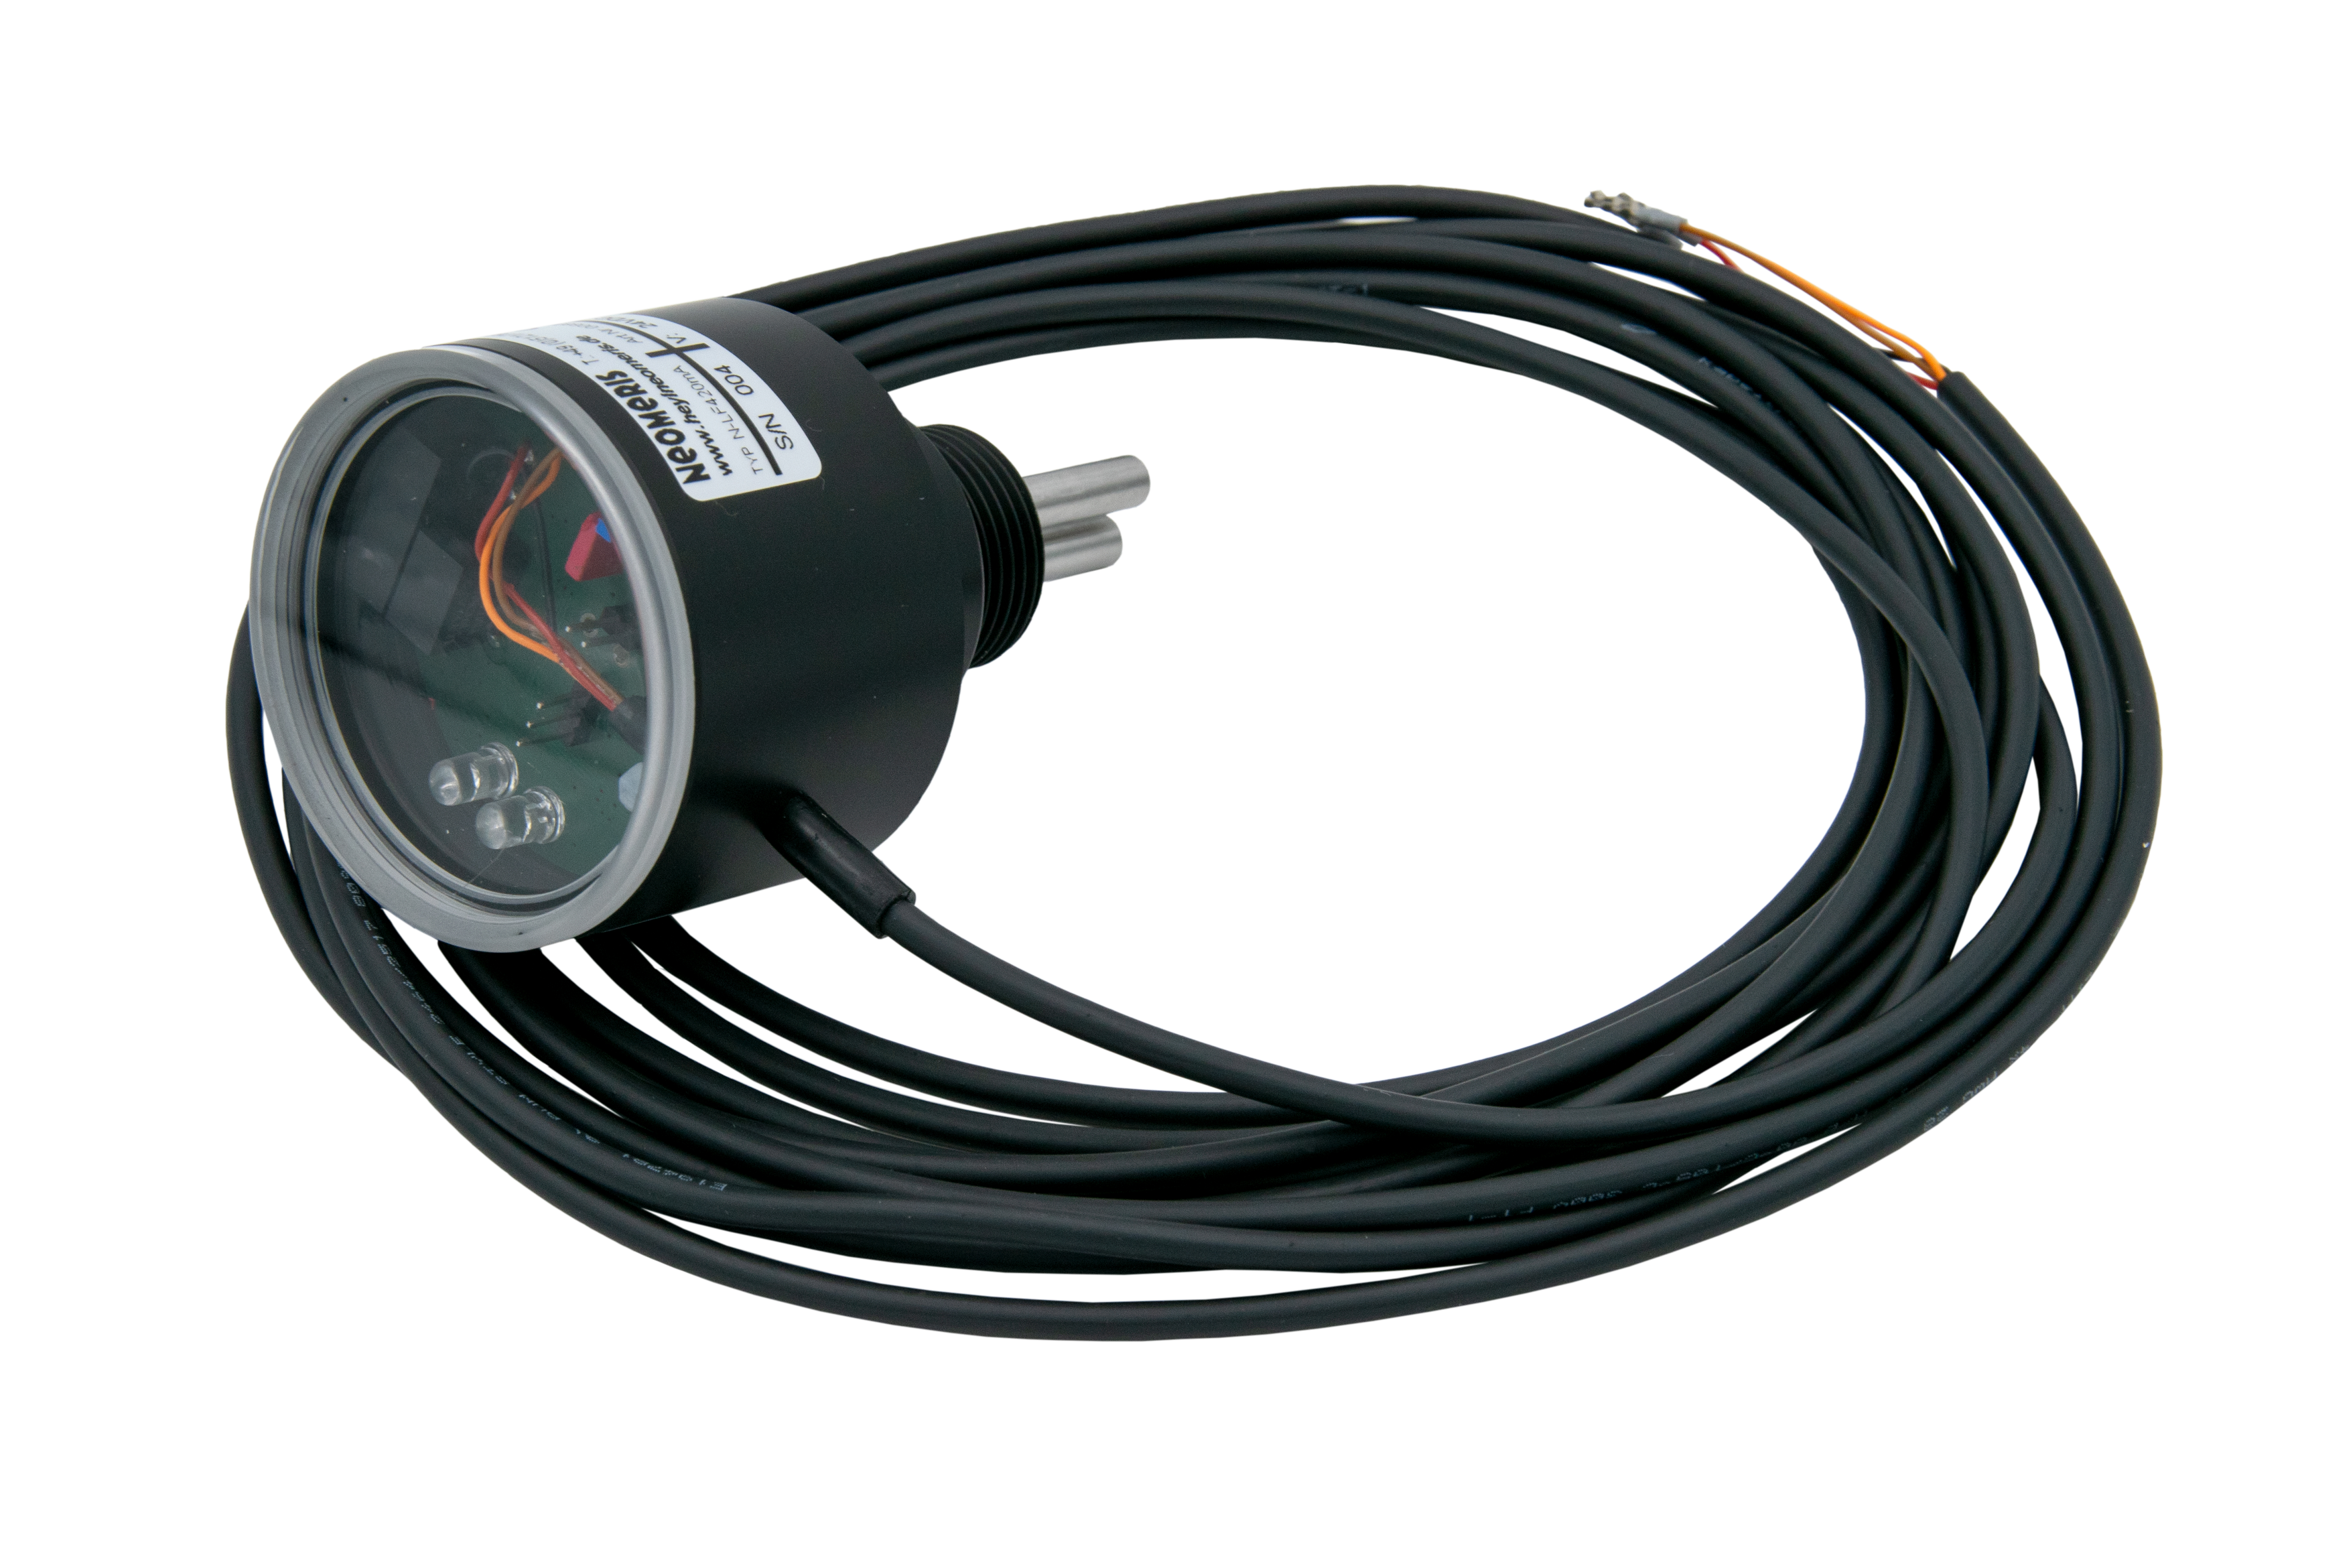 N-LF420 0-2000µS conductivity meter with 4-20mA output, LED configuration and screw-in thread according to your requirements